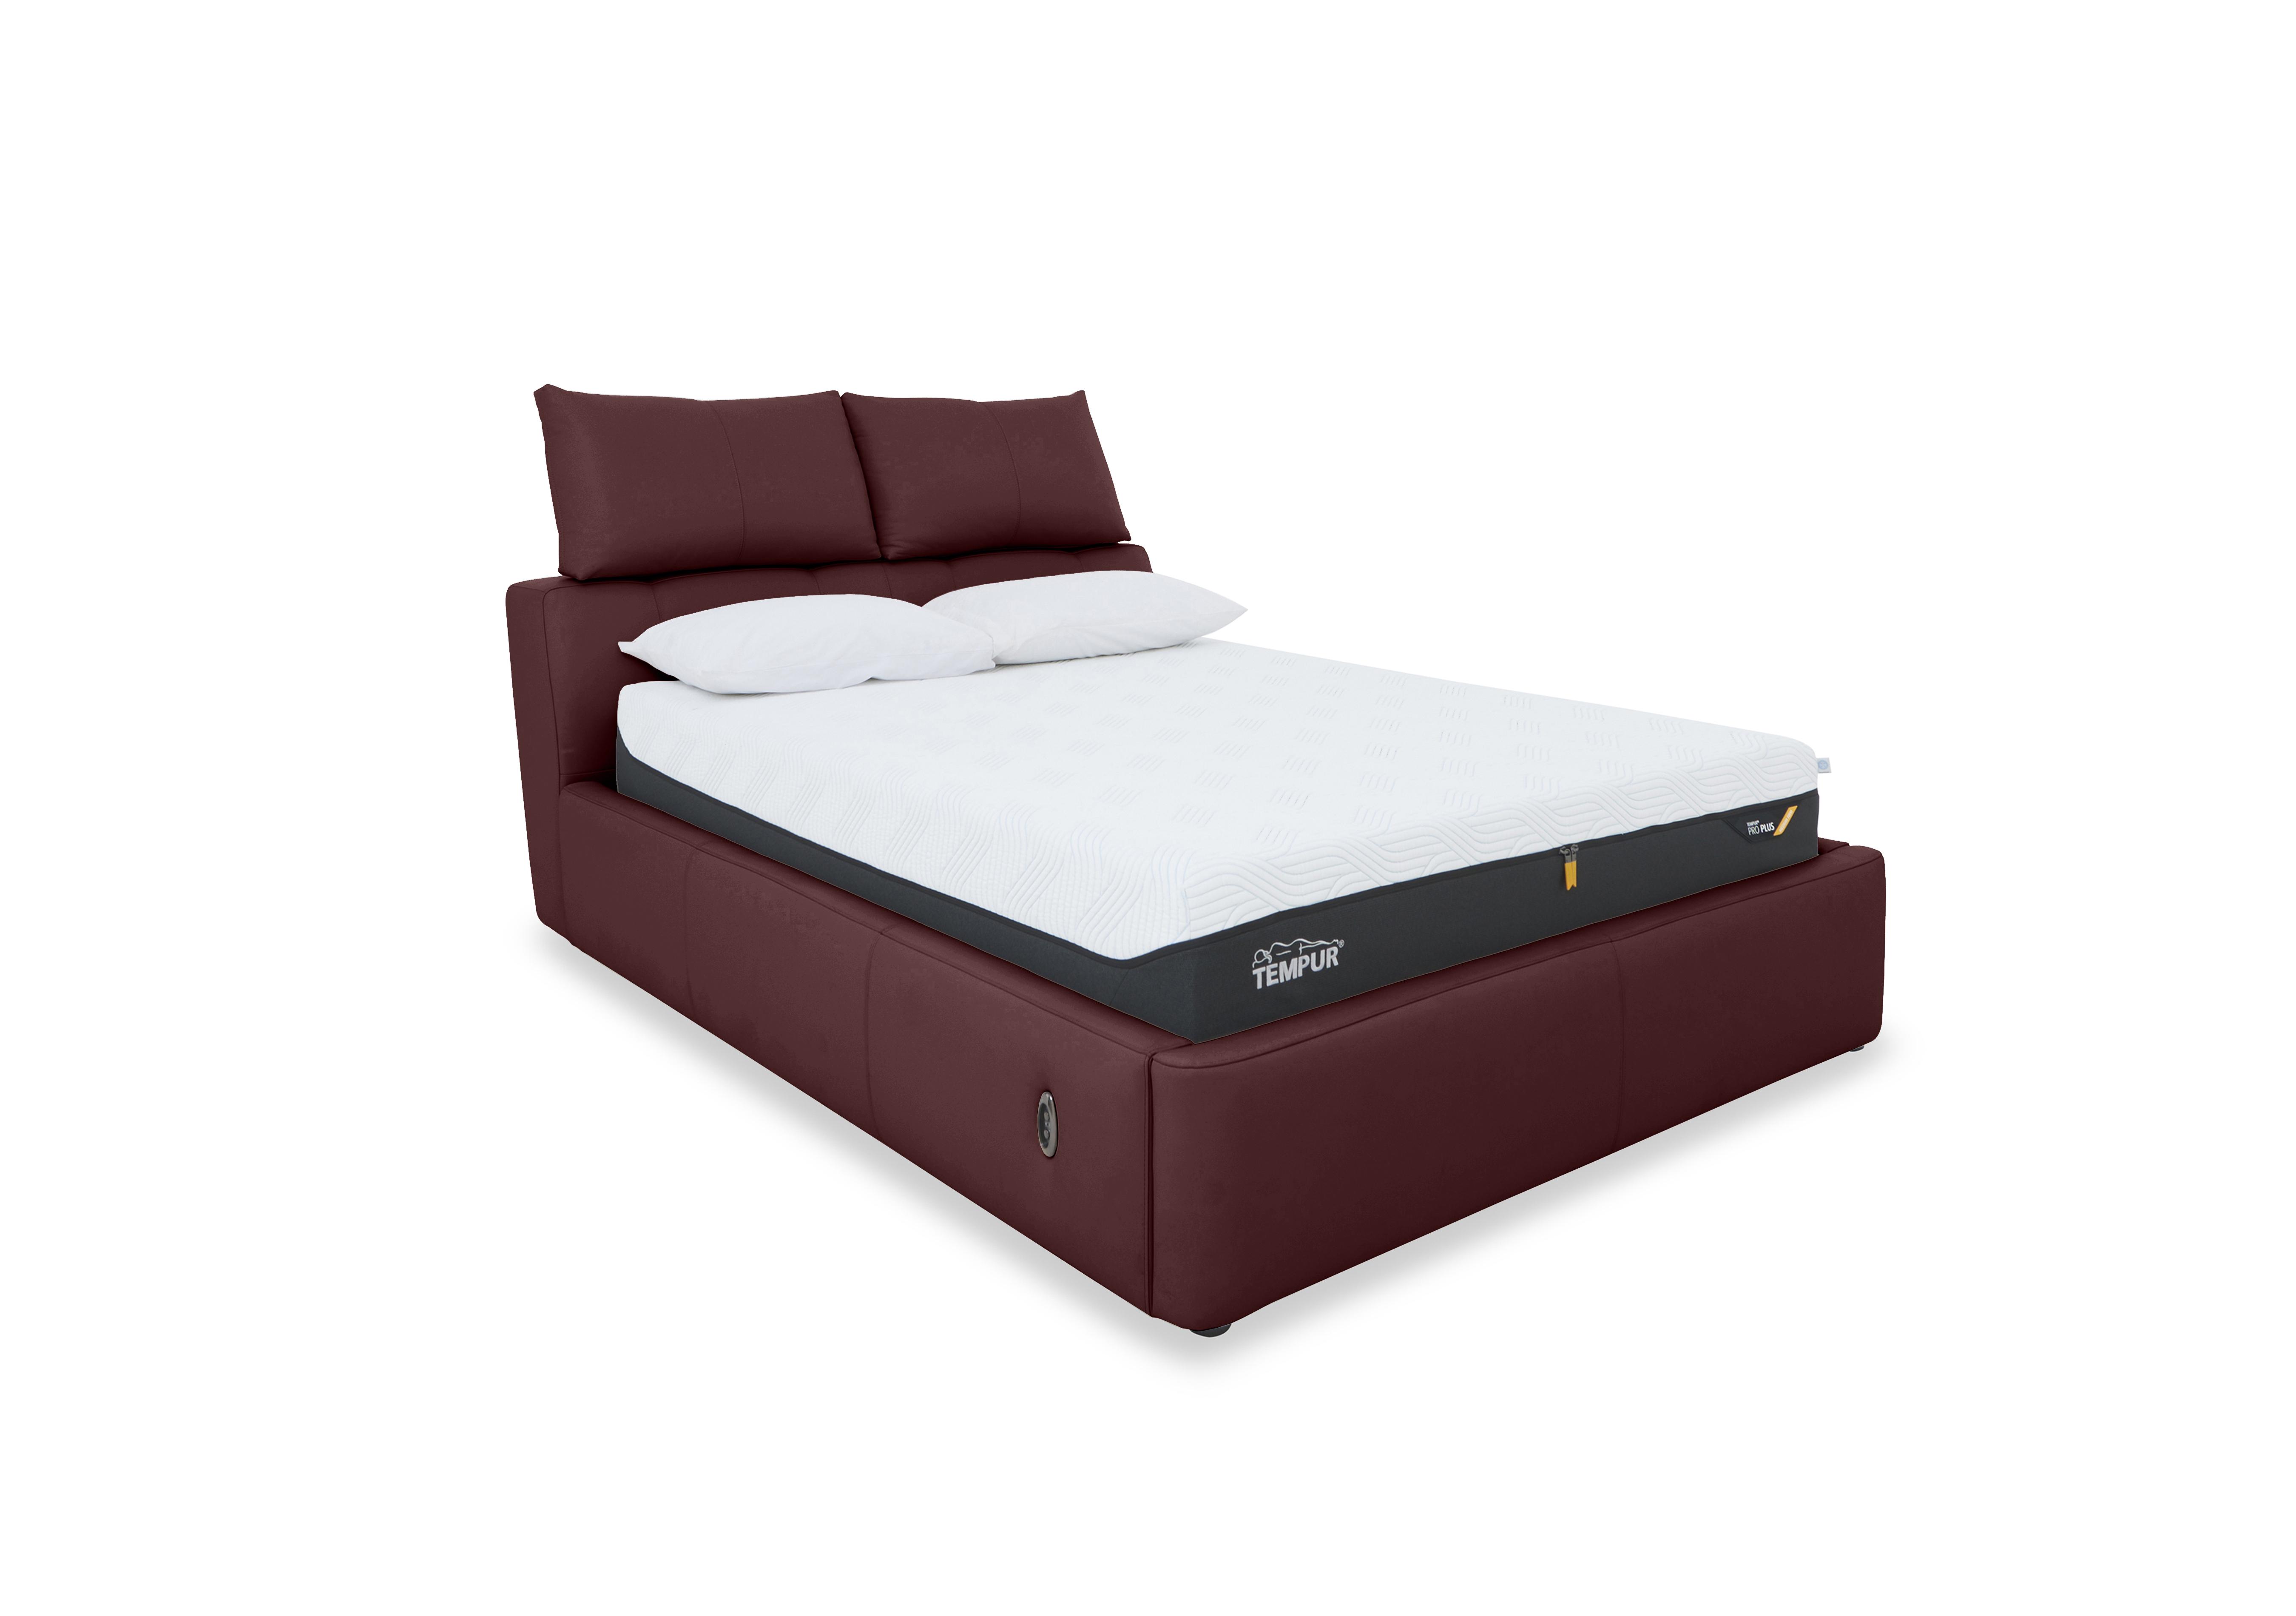 Tyrell Leather Electric Ottoman Bed Frame in Bv-035c Deep Red on Furniture Village